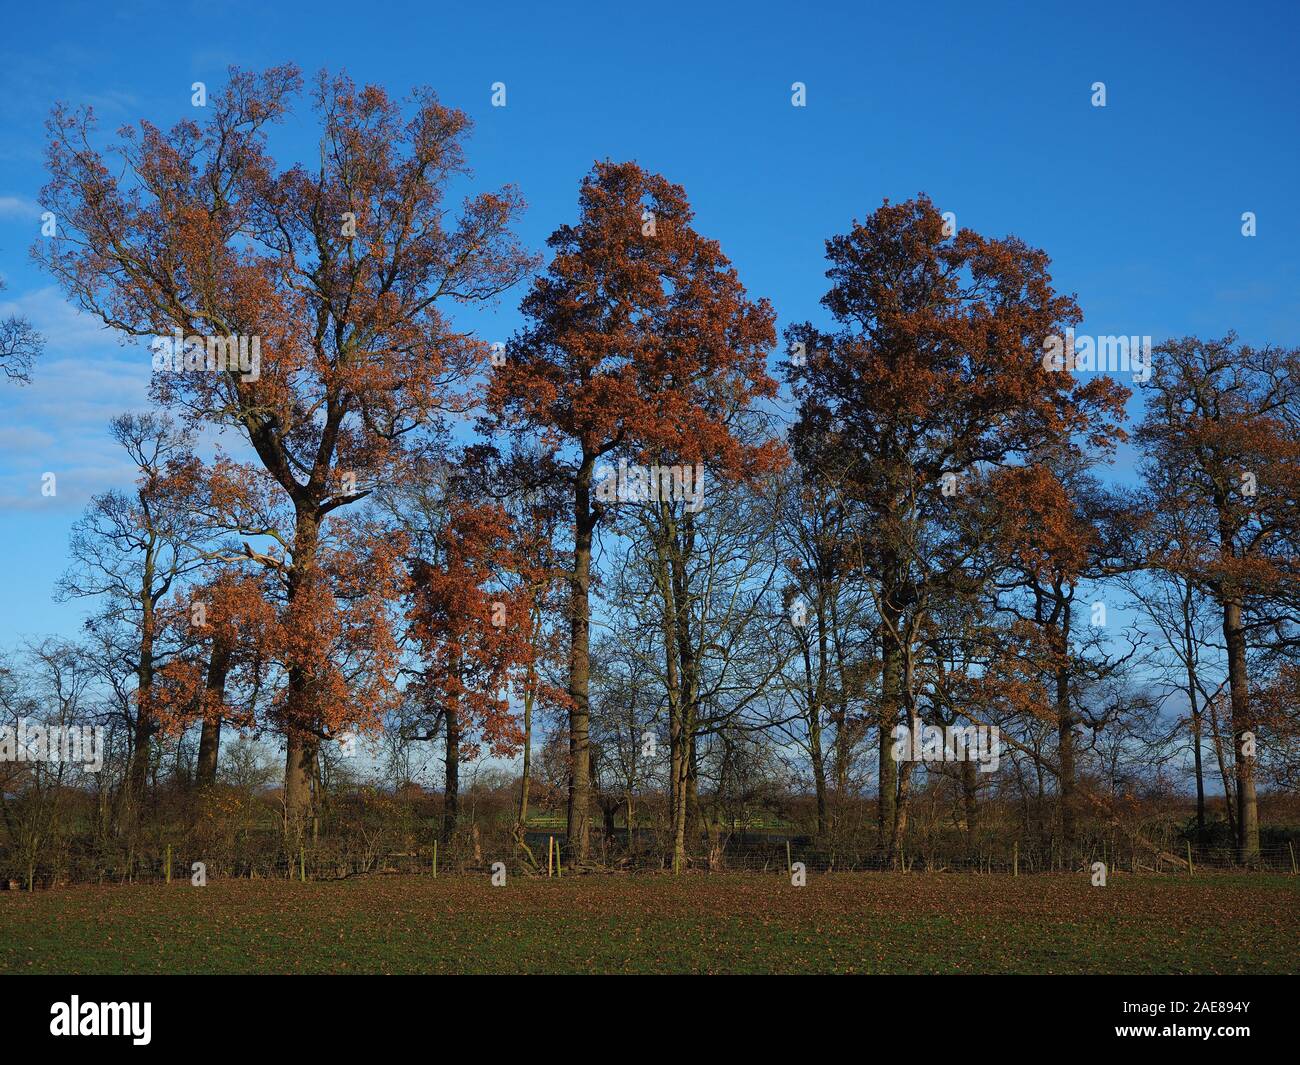 Trees with bronze coloured winter foliage in a park in North Yorkshire, England, with a blue sky background Stock Photo